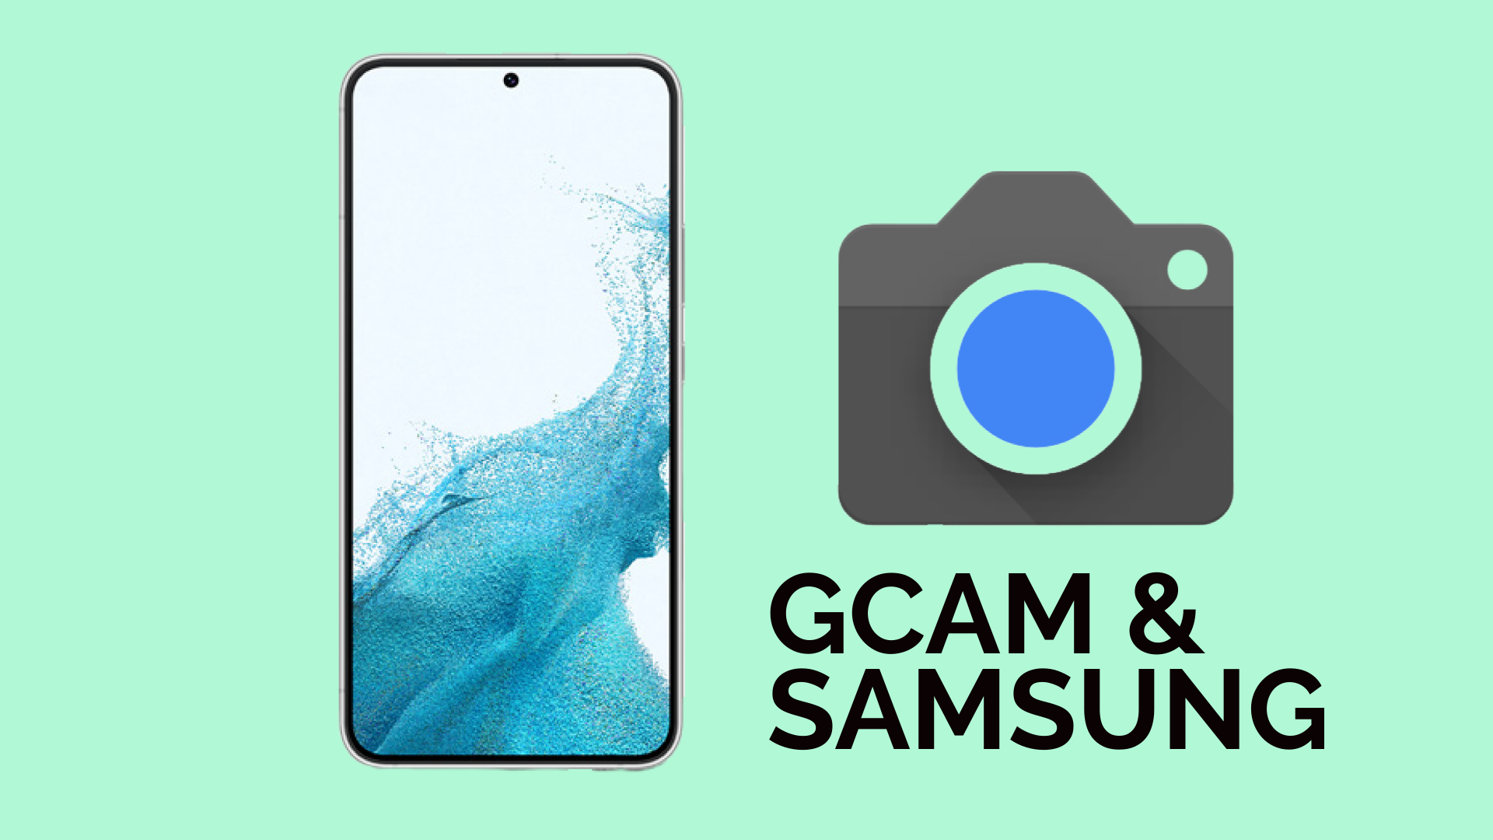 GCAM 8.4 APK Download For Samsung Galaxy Devices Exynos and Snapdragon